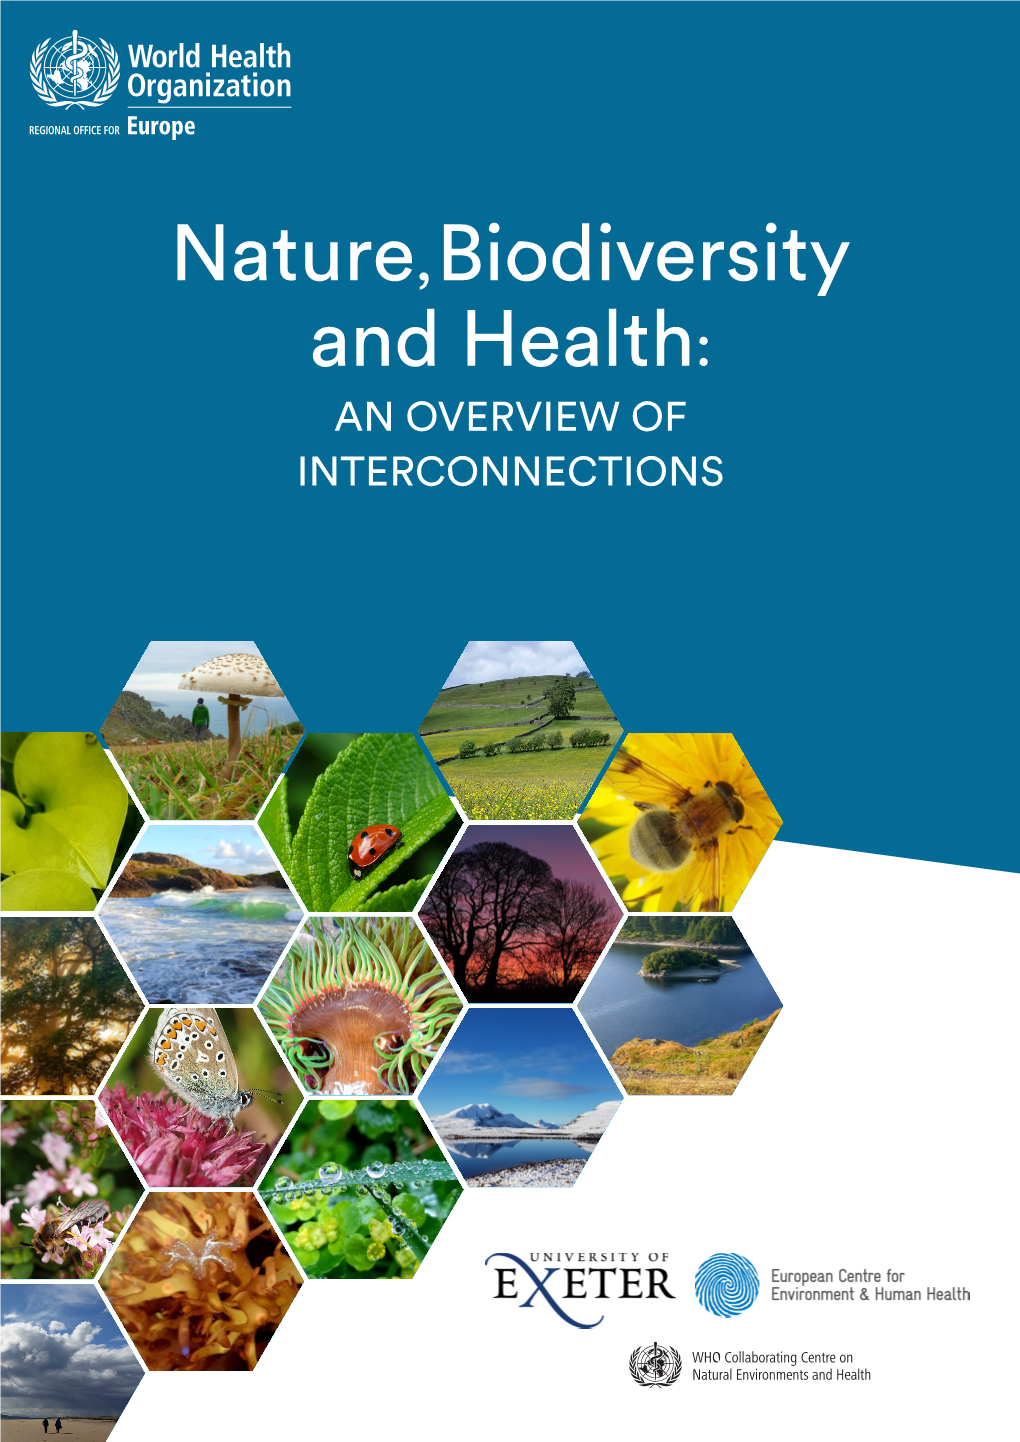 Nature, Biodiversity and Health: an OVERVIEW of INTERCONNECTIONS